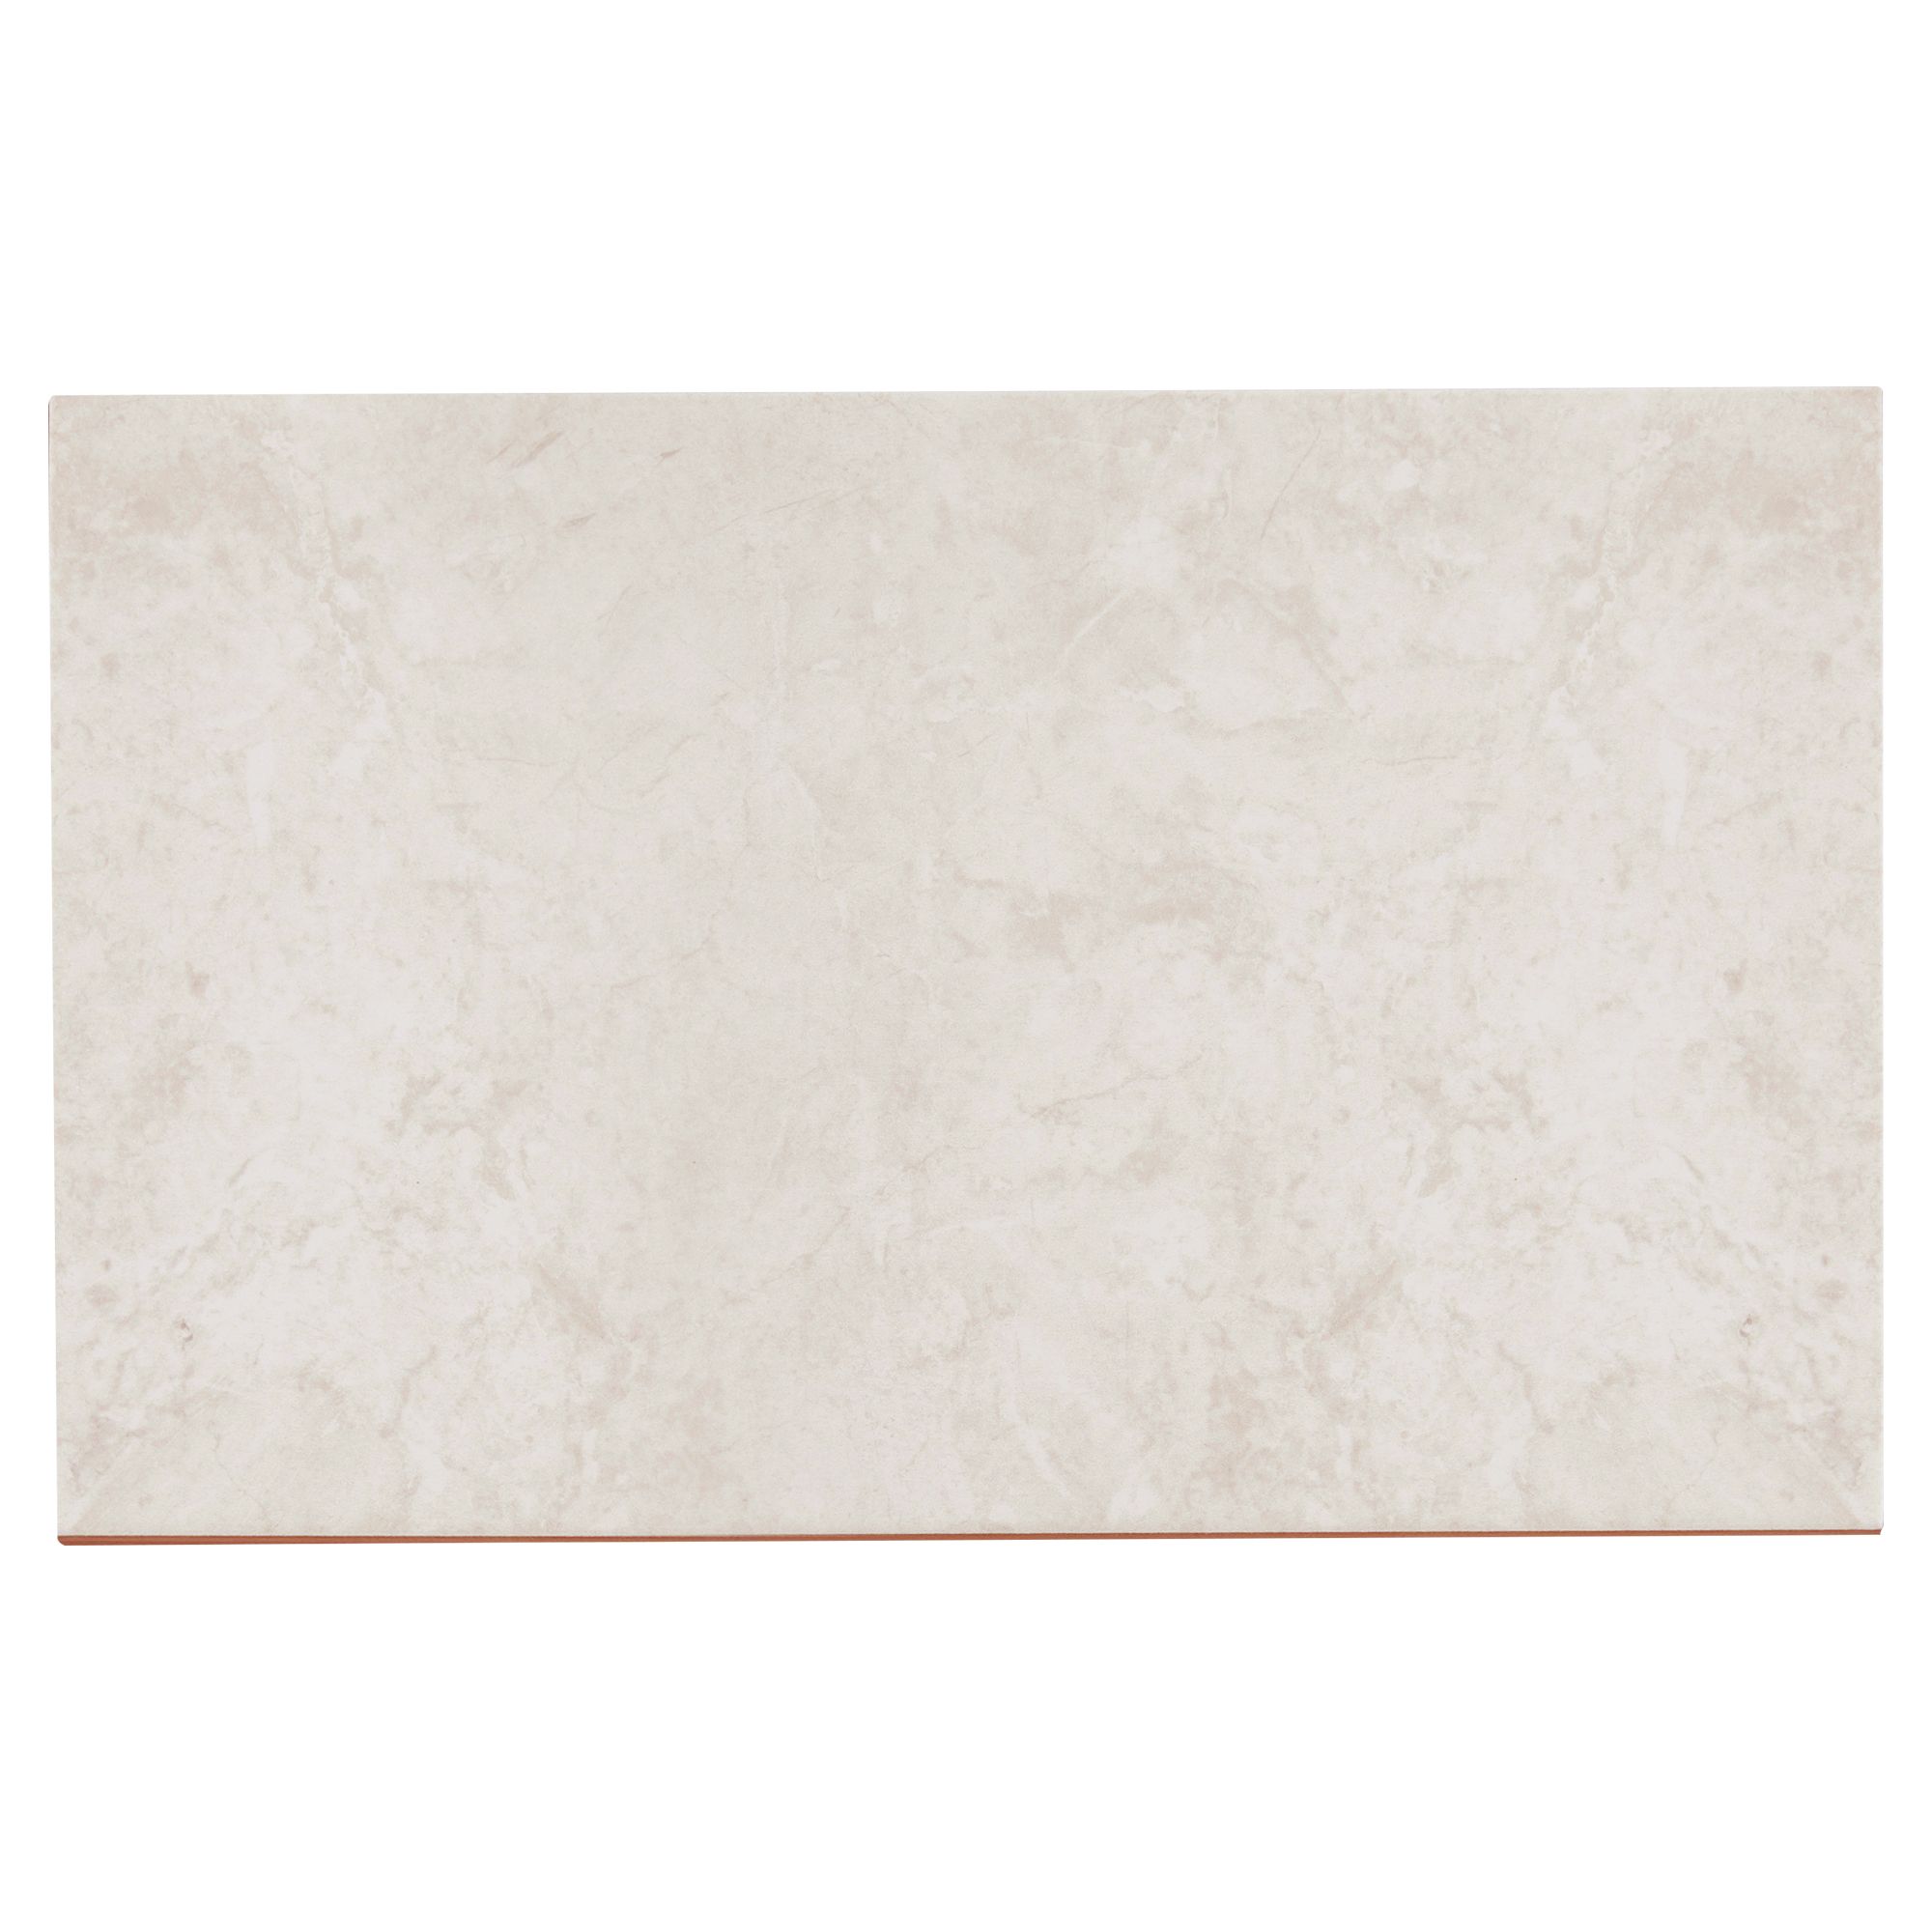 Commo Brown Gloss Flat Ceramic Indoor Wall Tile, Pack of 10, (L)402.4mm (W)251.6mm